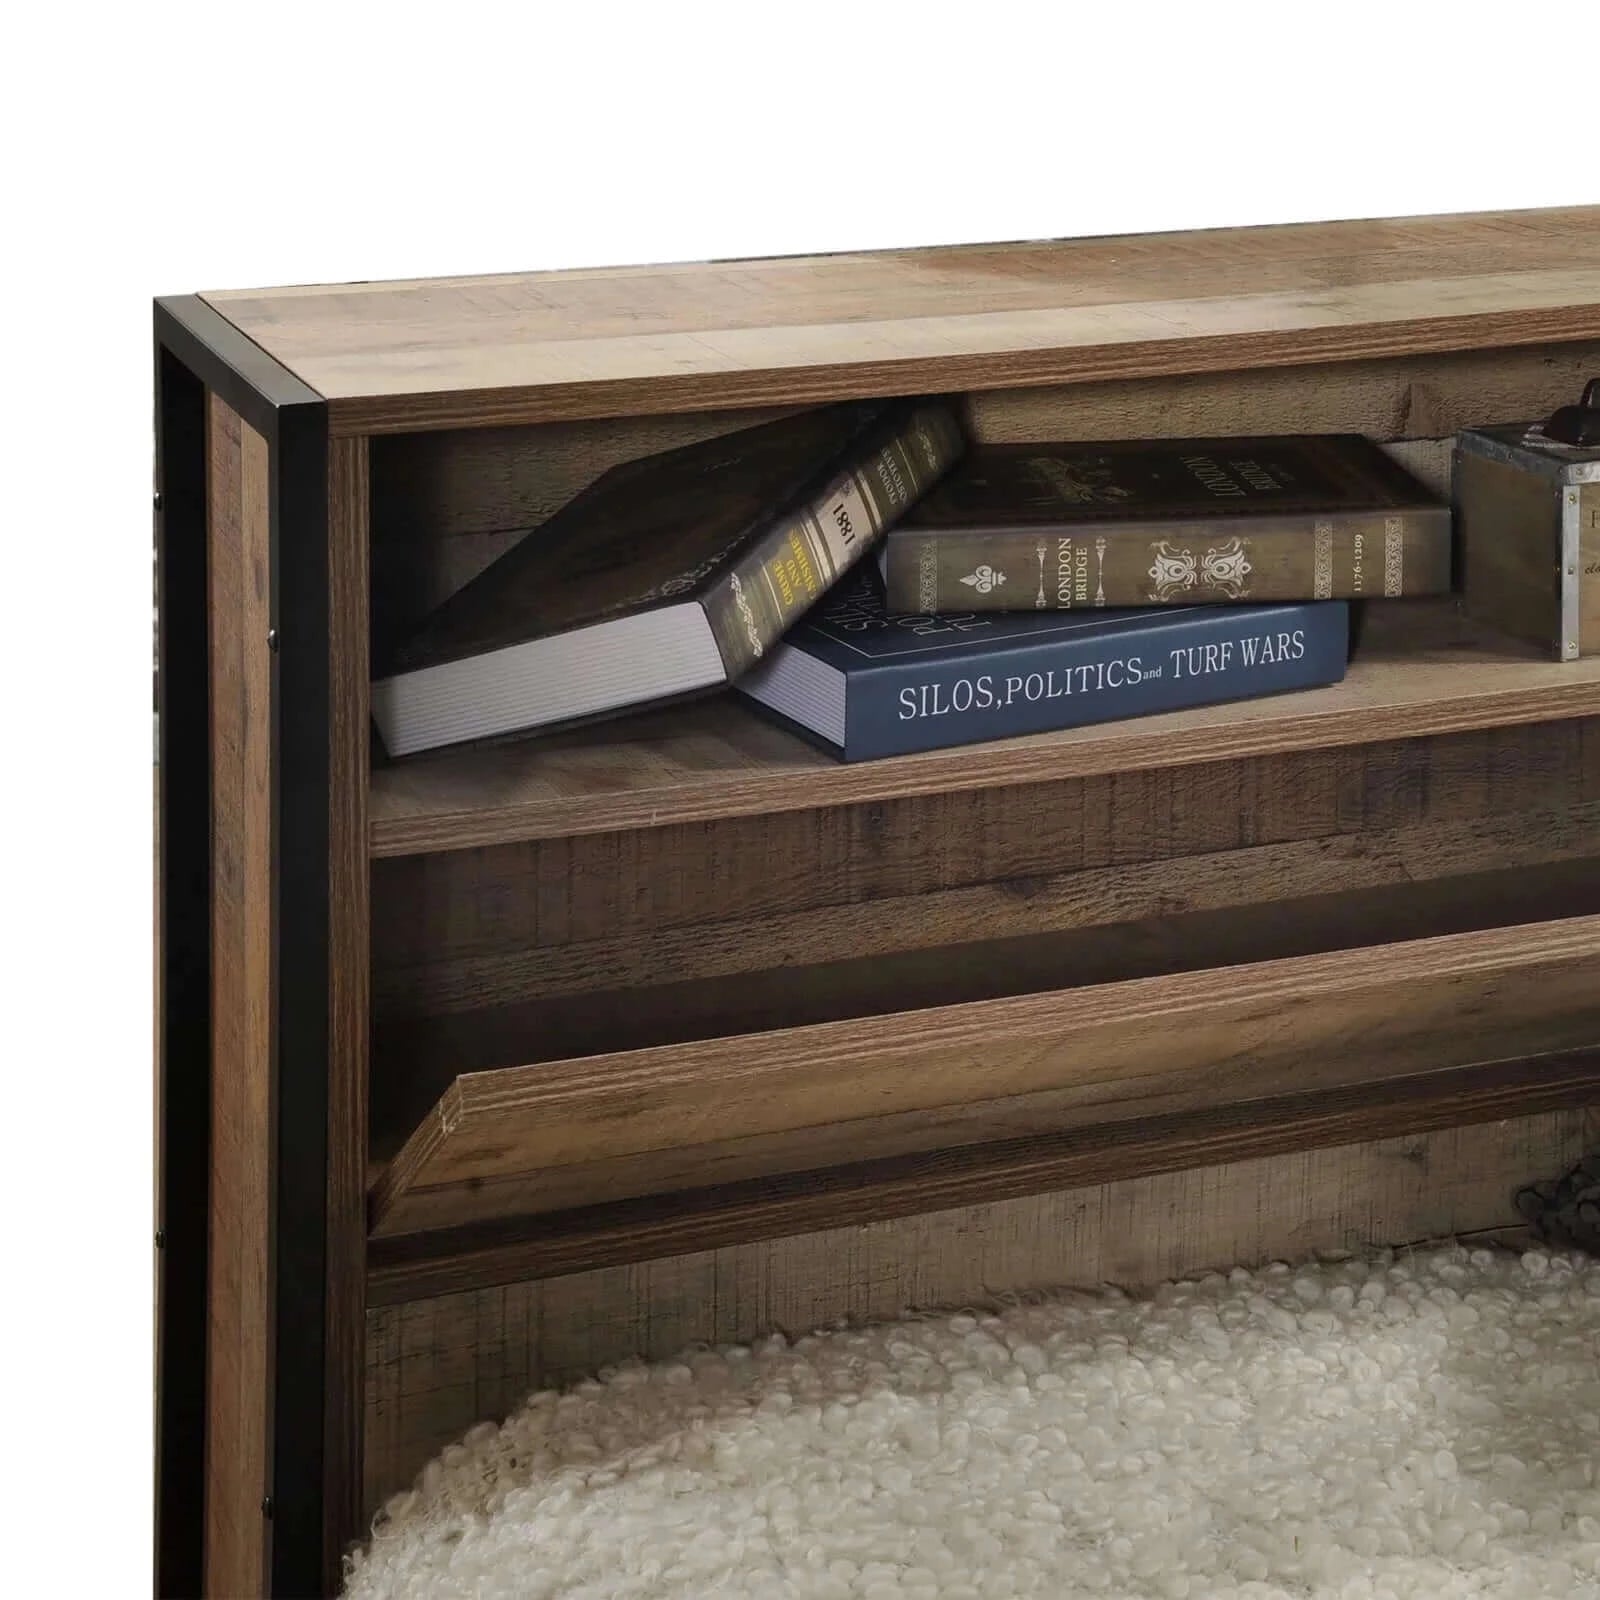 Buy queen size storage bed farme in oak colour with particle board contraction and metal legs - upinteriors-Upinteriors